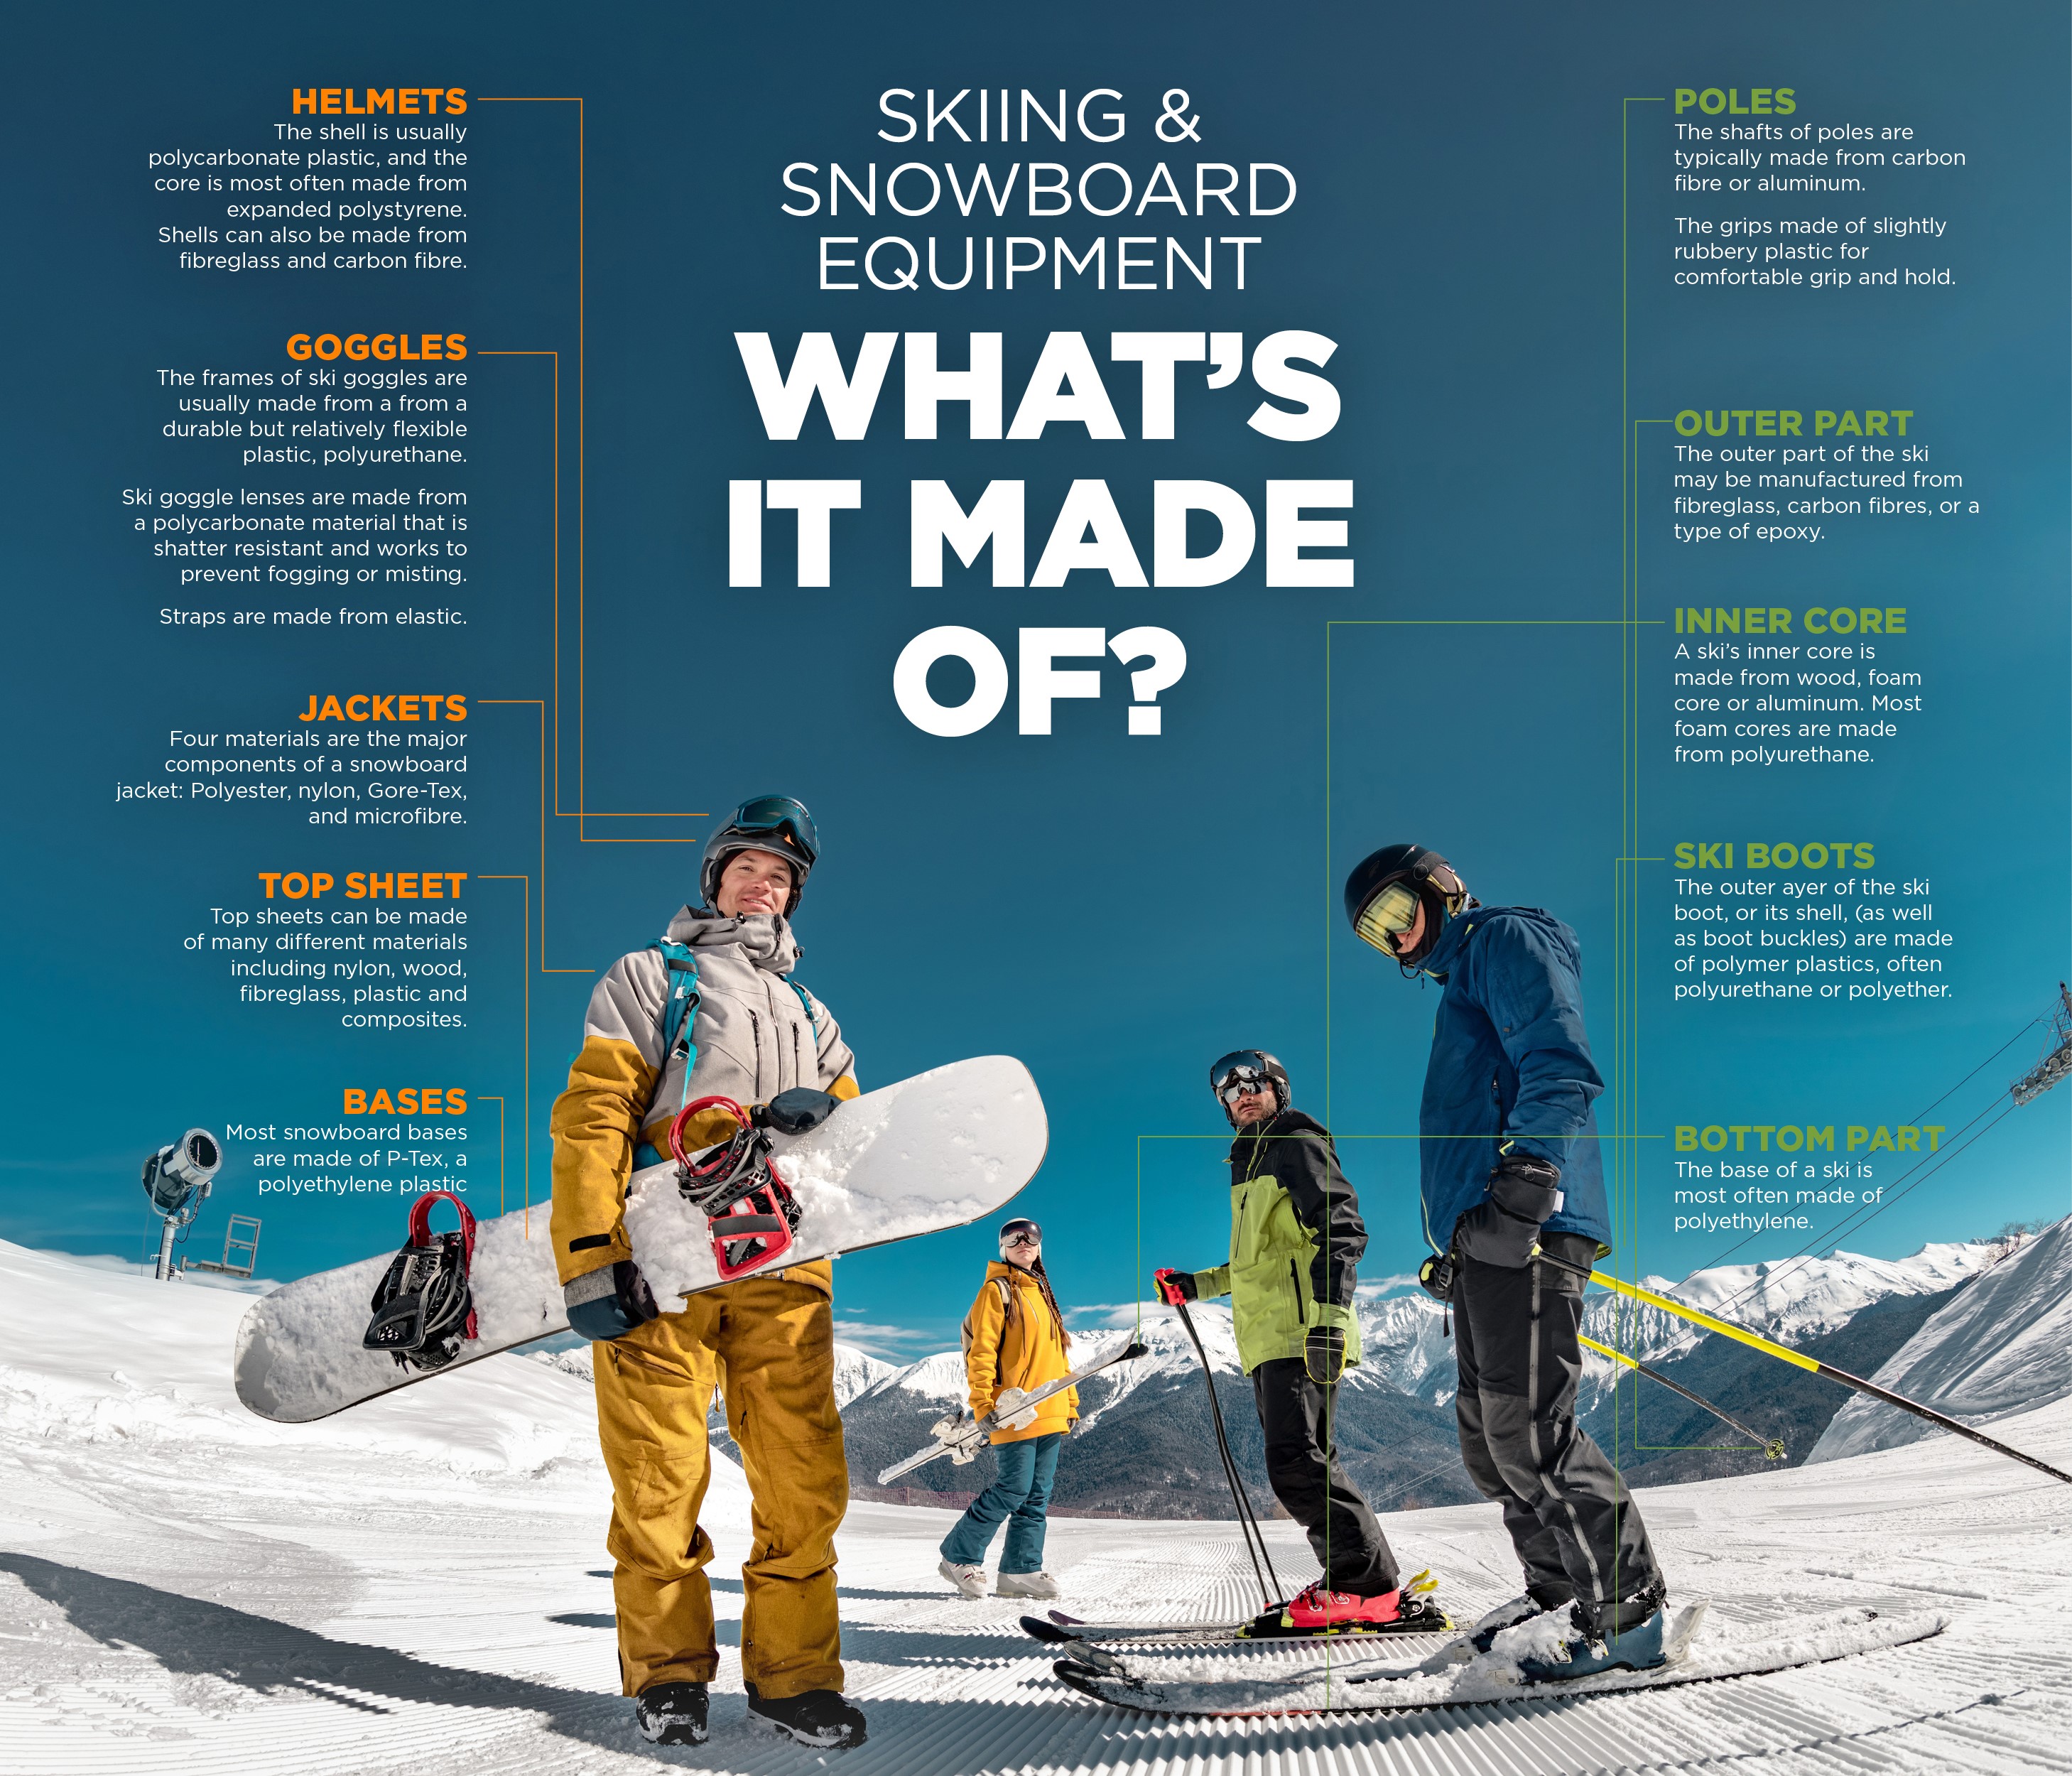 Winter skiing and snowboarding gear